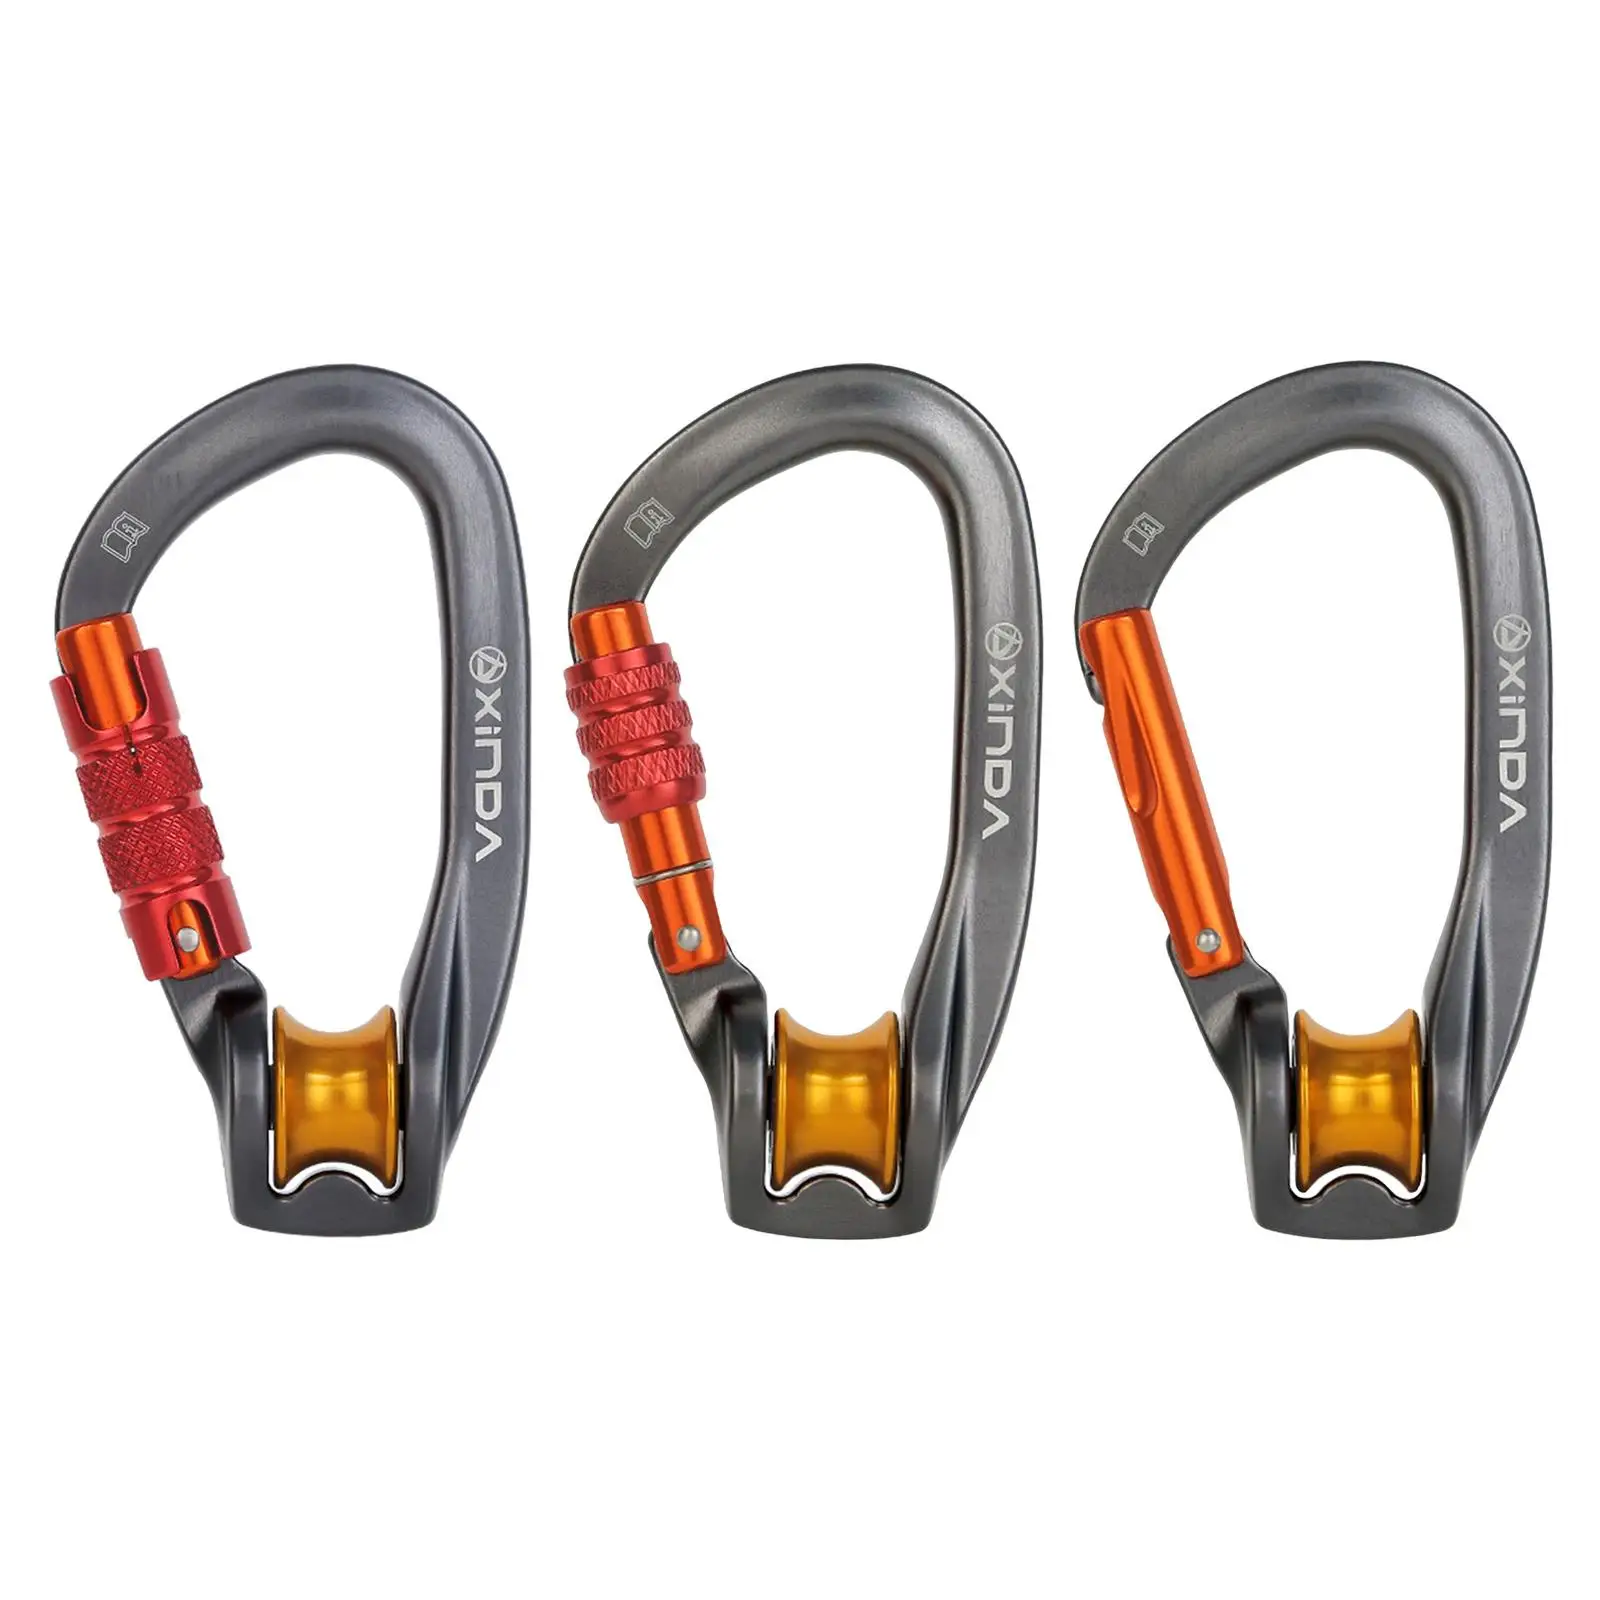 Professional Climbing Carabiner D Shape Safety Lock Outdoor Climbing Ascend Mountaineering Equipment